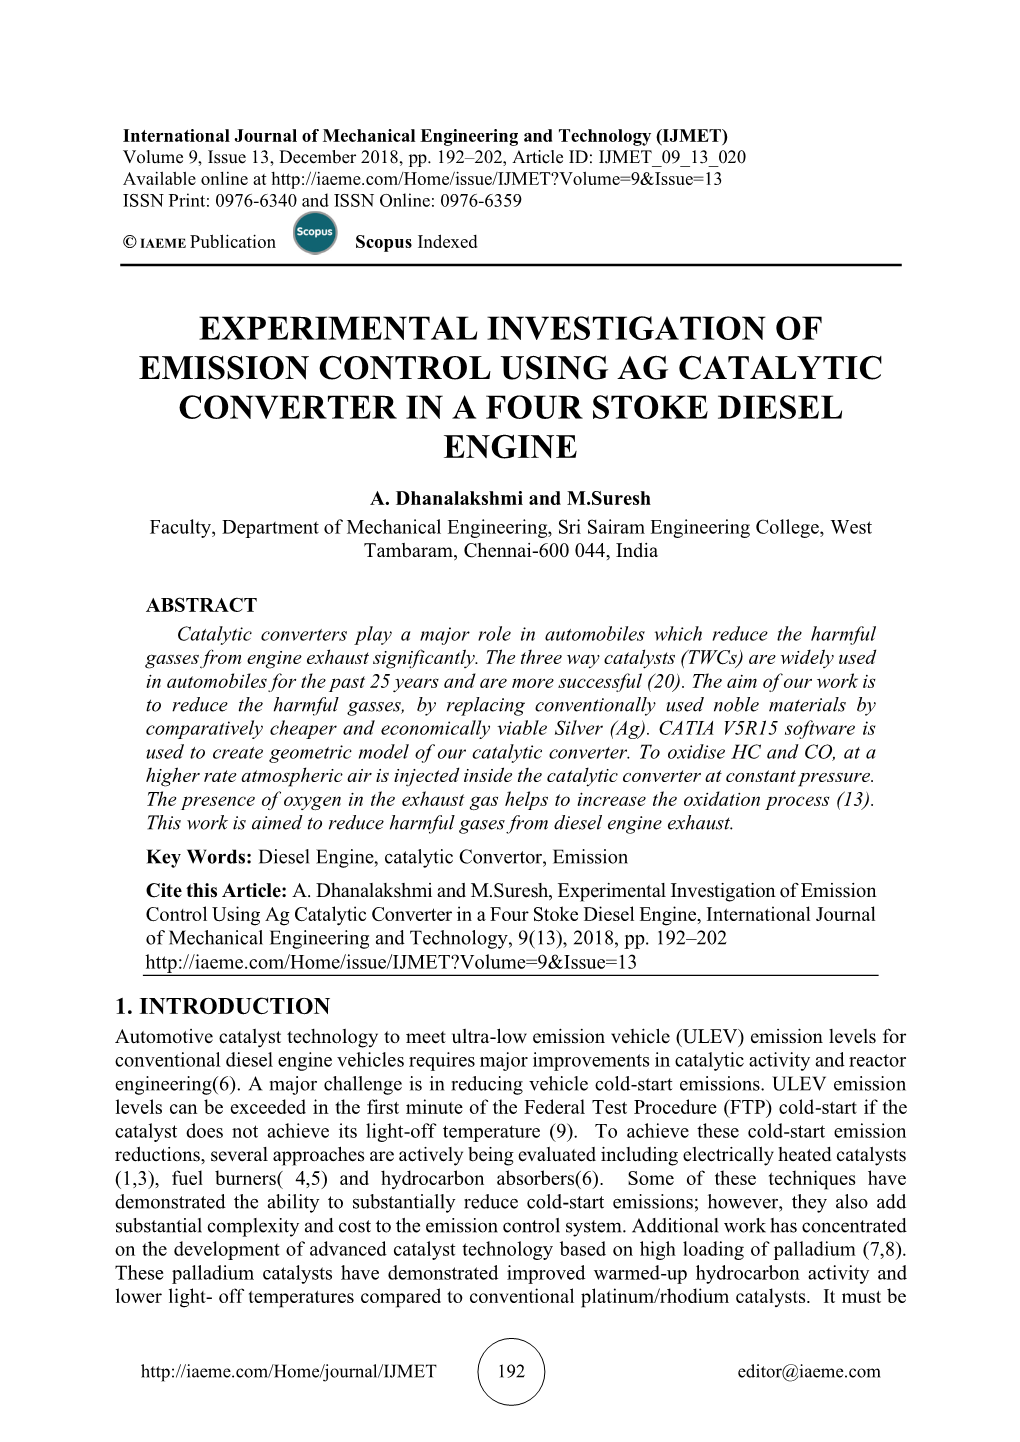 Experimental Investigation of Emission Control Using Ag Catalytic Converter in a Four Stoke Diesel Engine